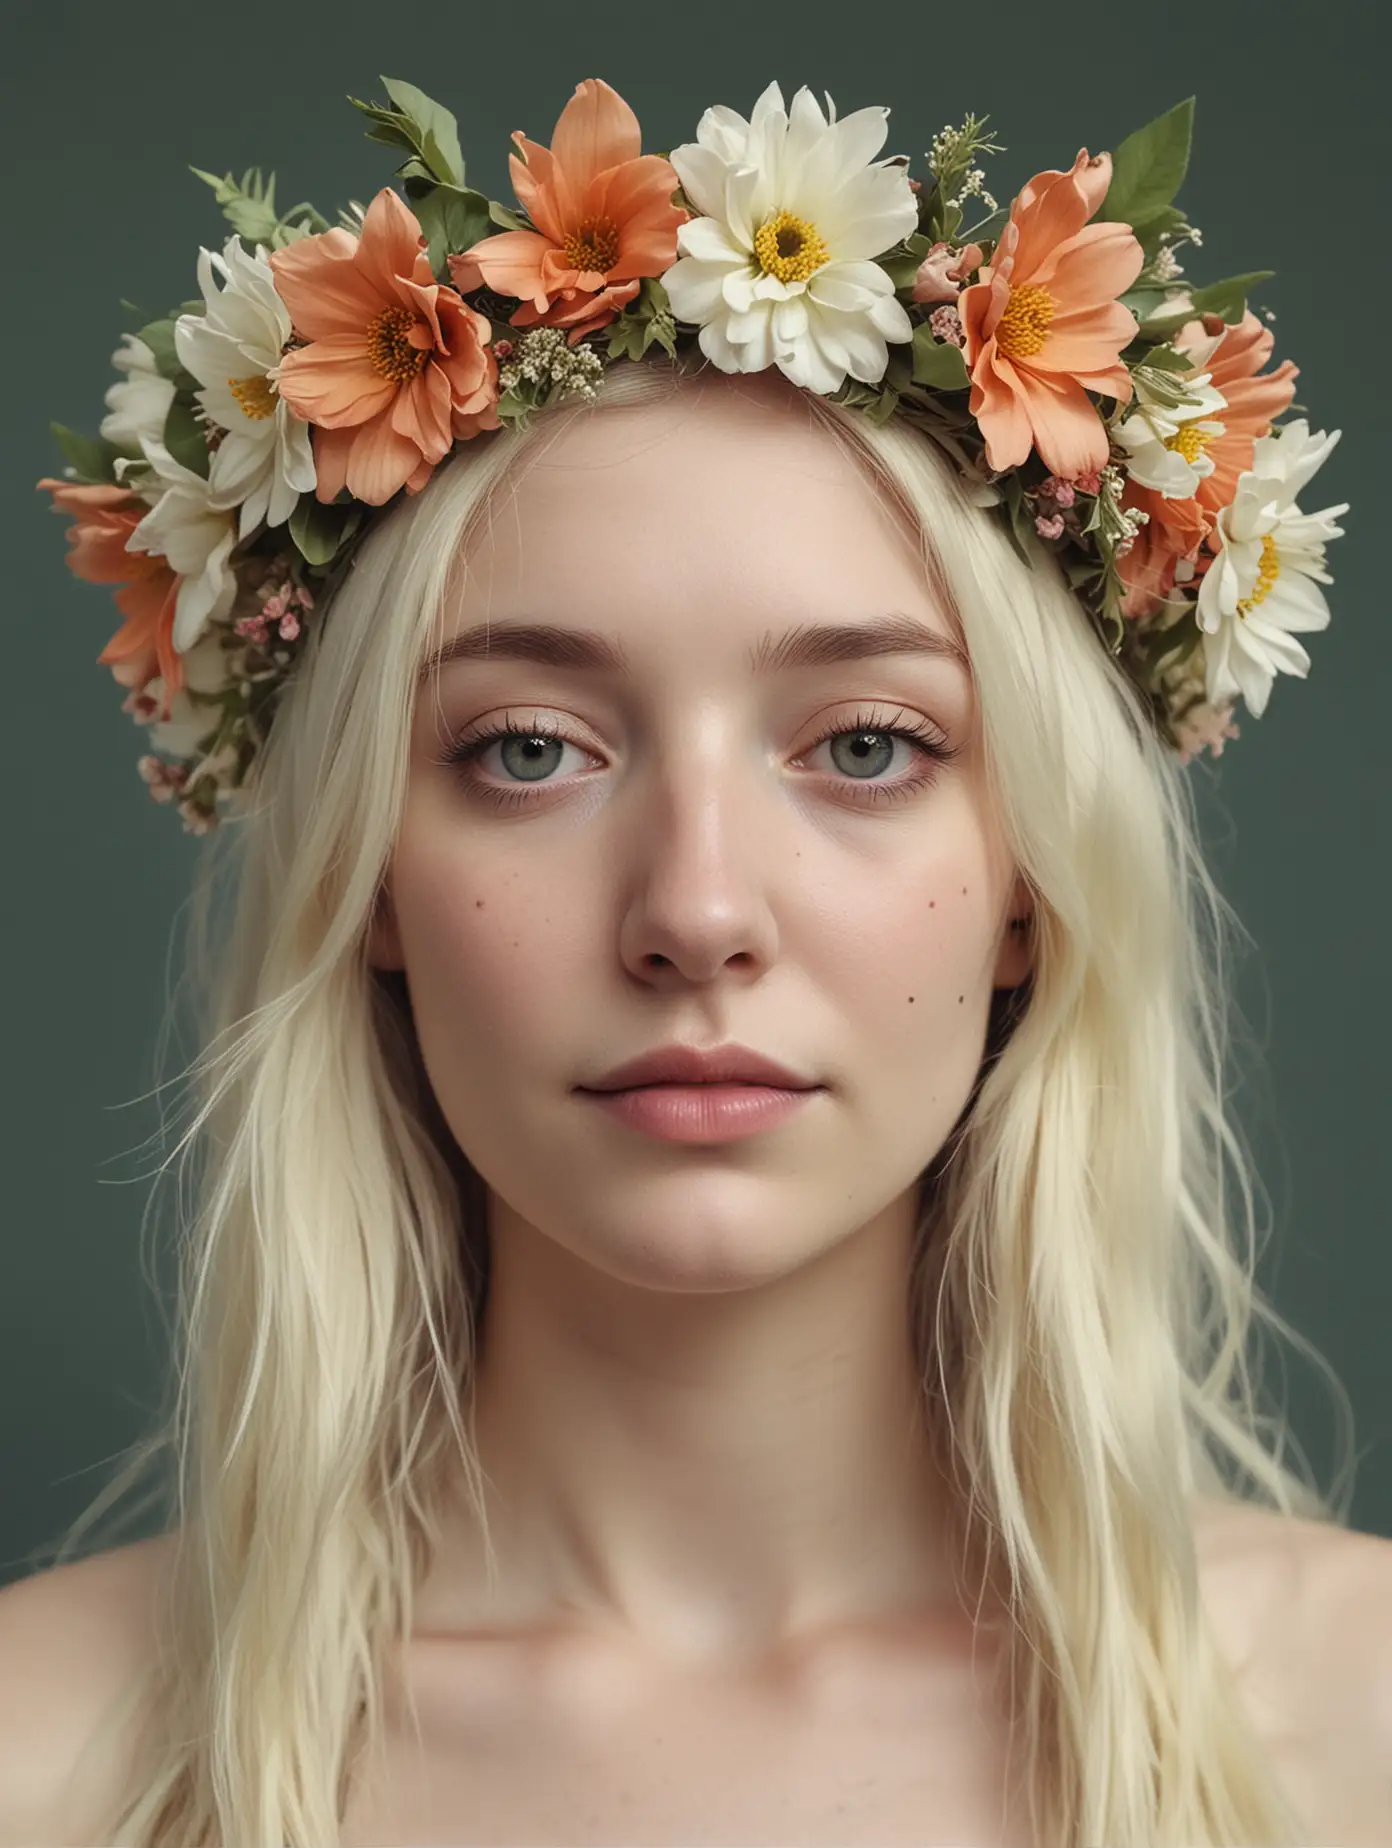 Pale Woman with Flower Crown in Surreal Setting